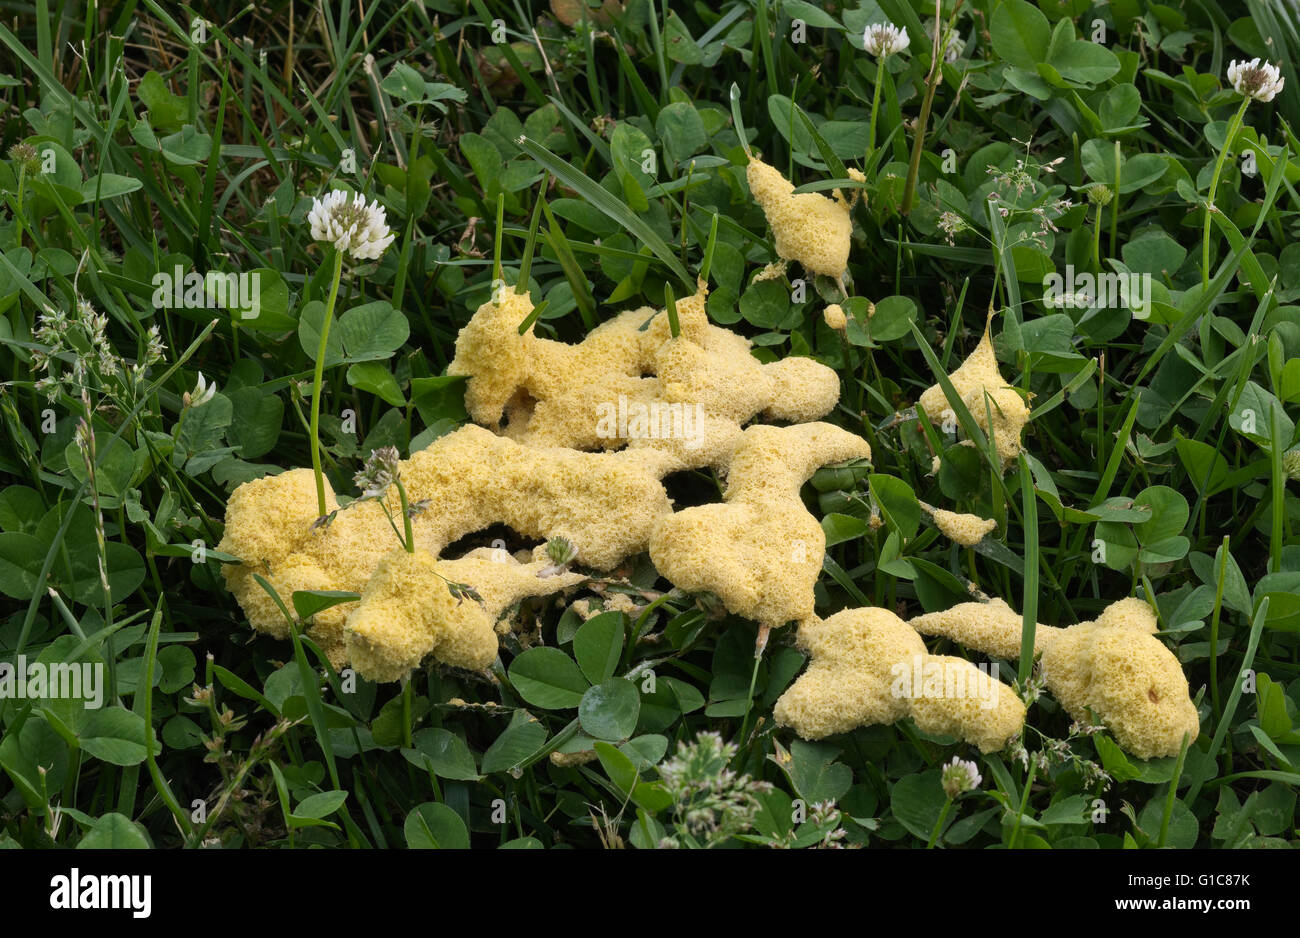 Dog Vomit Slime Mold on clover and grass in yard. Fuligo septica. Also known as Scrambled Egg Slime, or Flowers of Tan Stock Photo